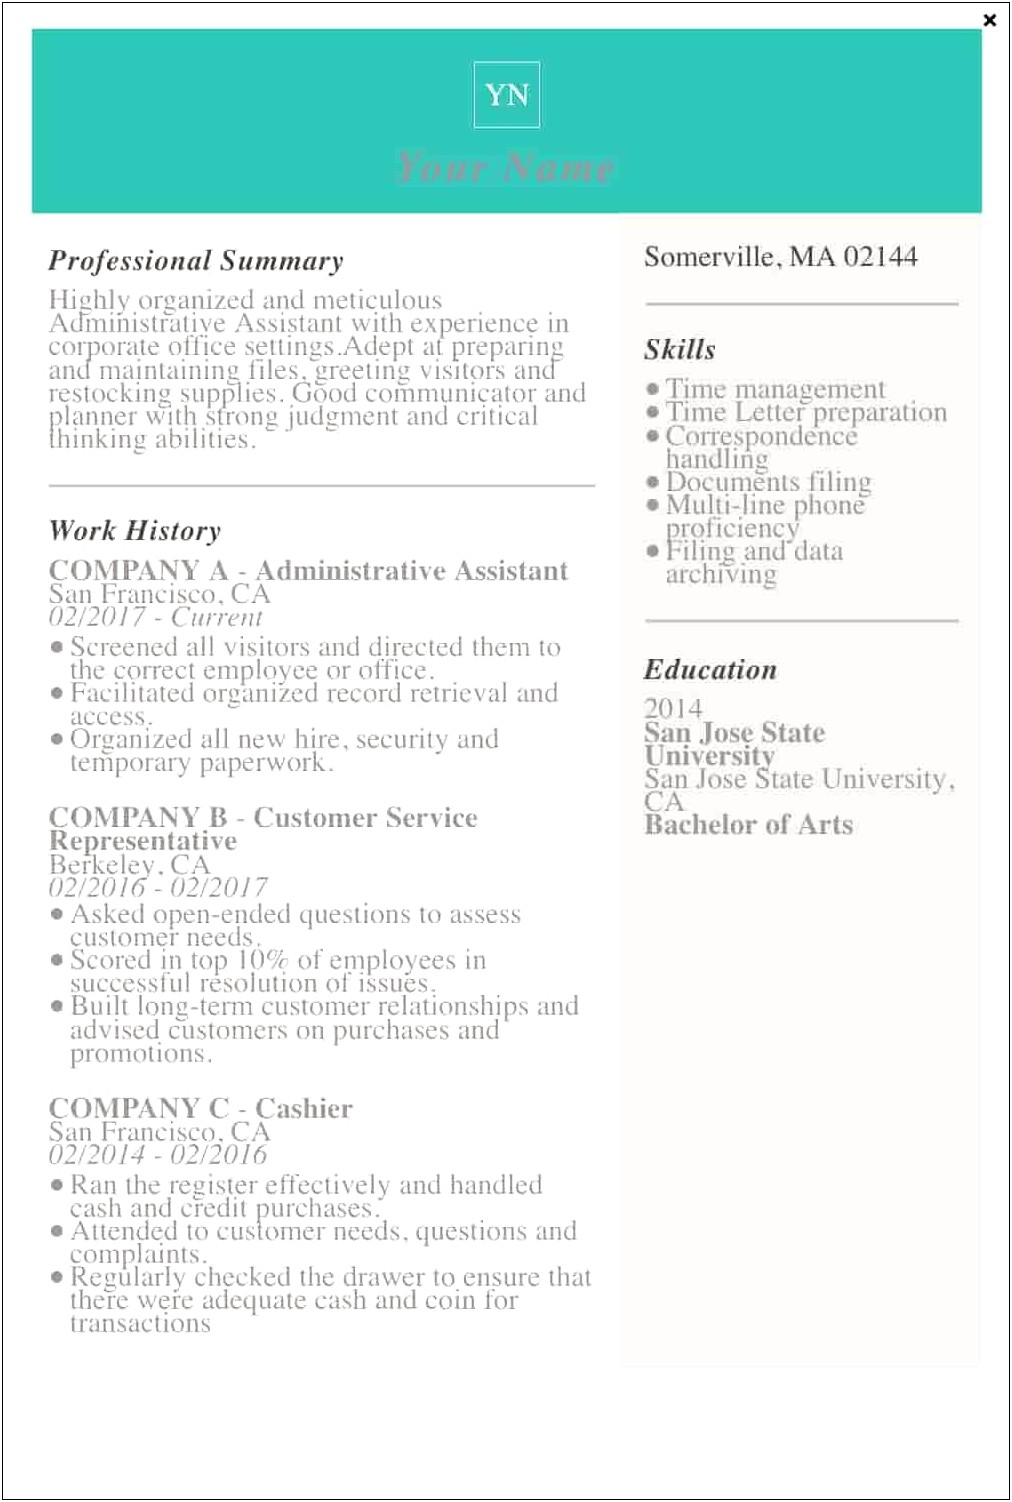 2016 Resume Example With No College Education